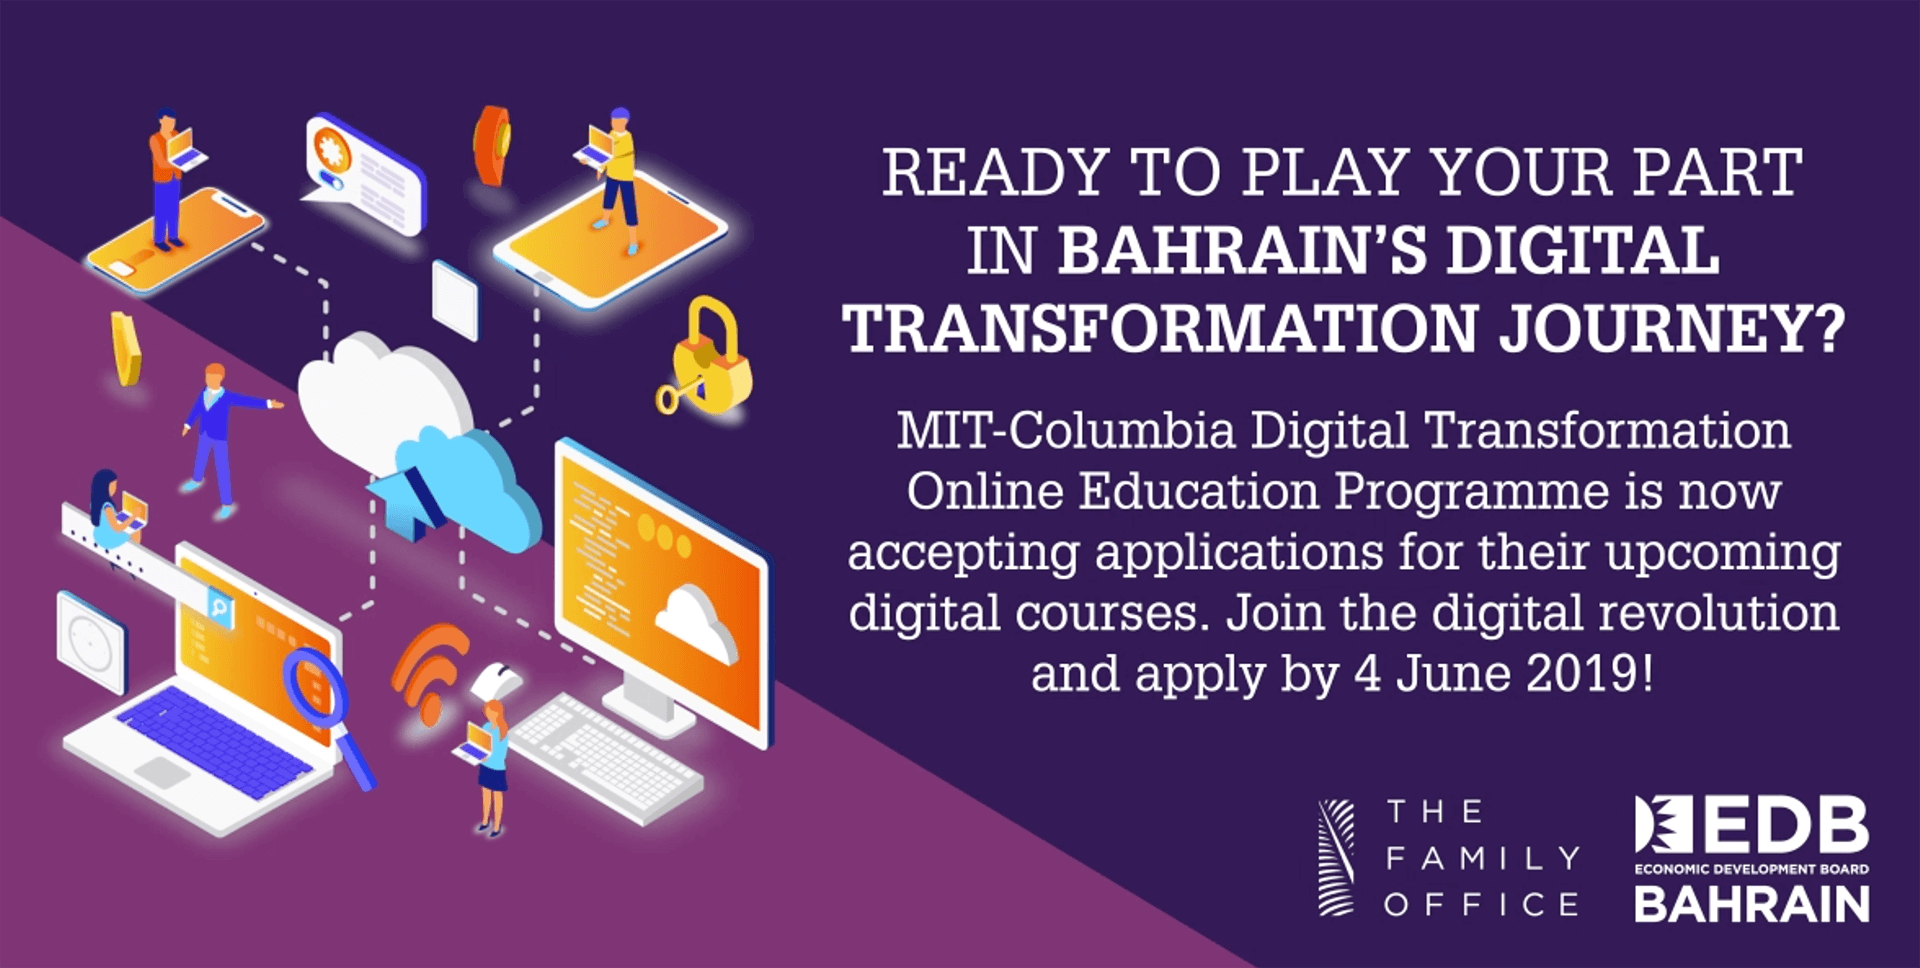 ‘The Family Office’ Launches Programme to Sponsor 100 Bahrainis to Attend Digital Transformation Courses